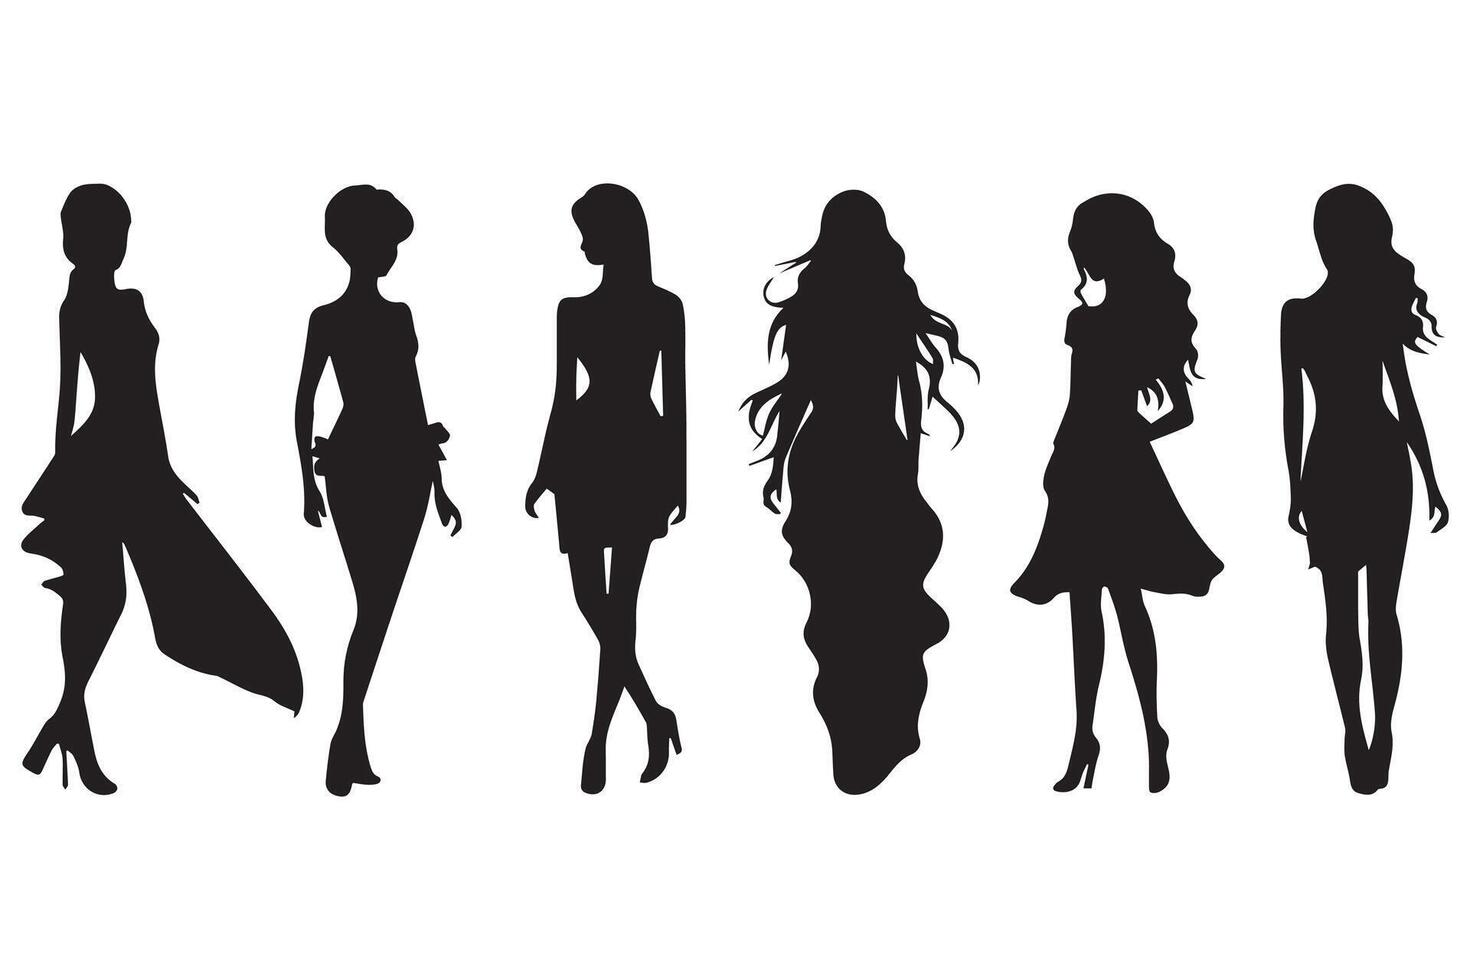 Set of black silhouettes of girls isolated on white background free design vector